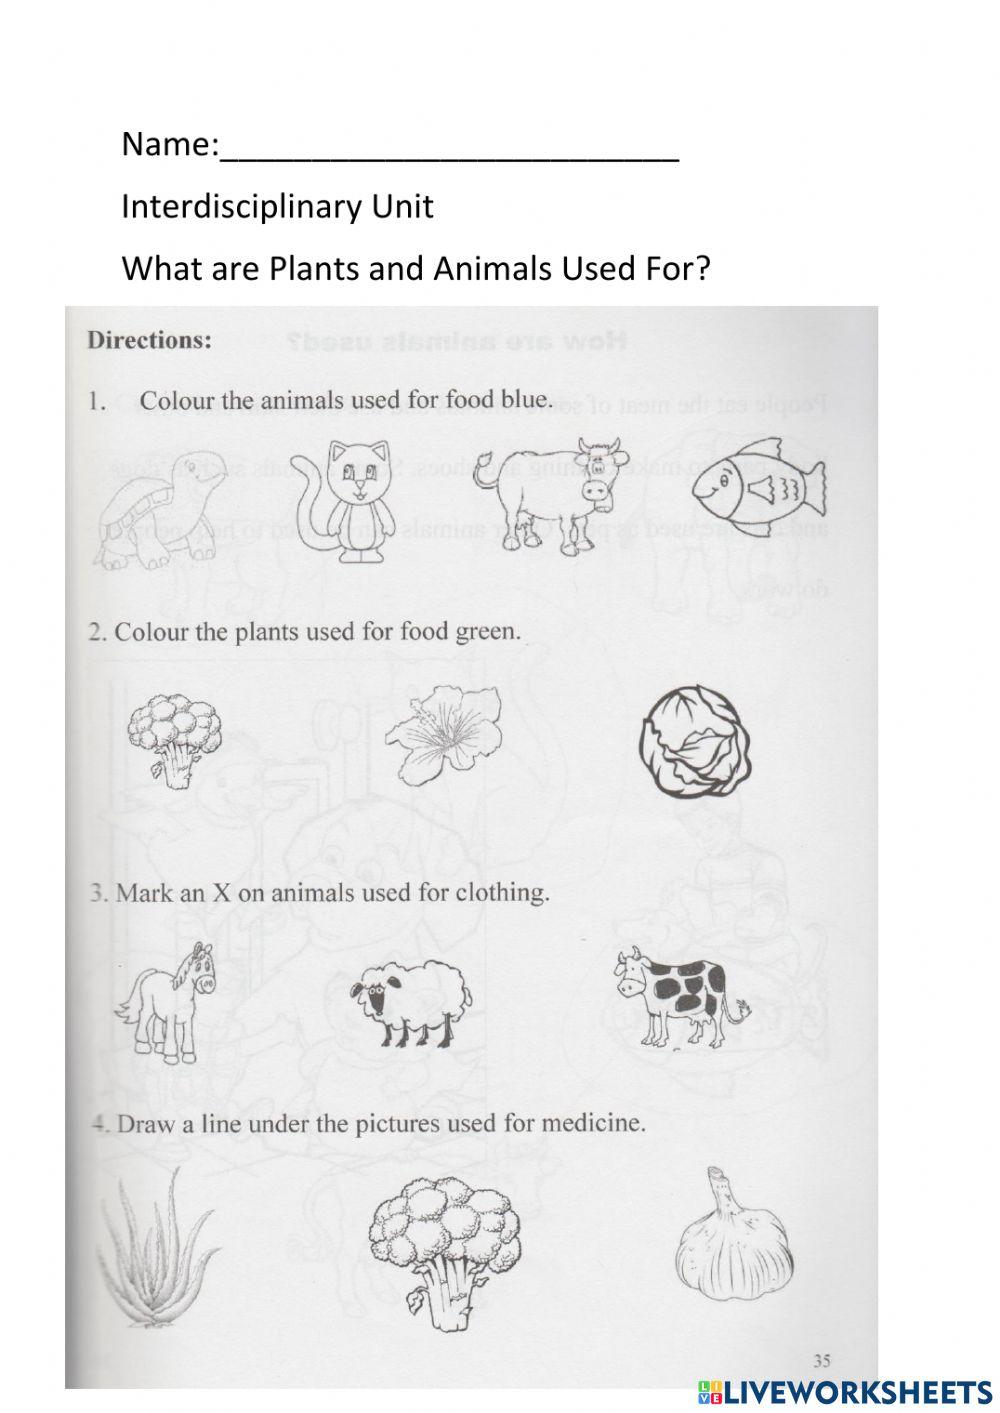 What Plants and Animals are Used For?